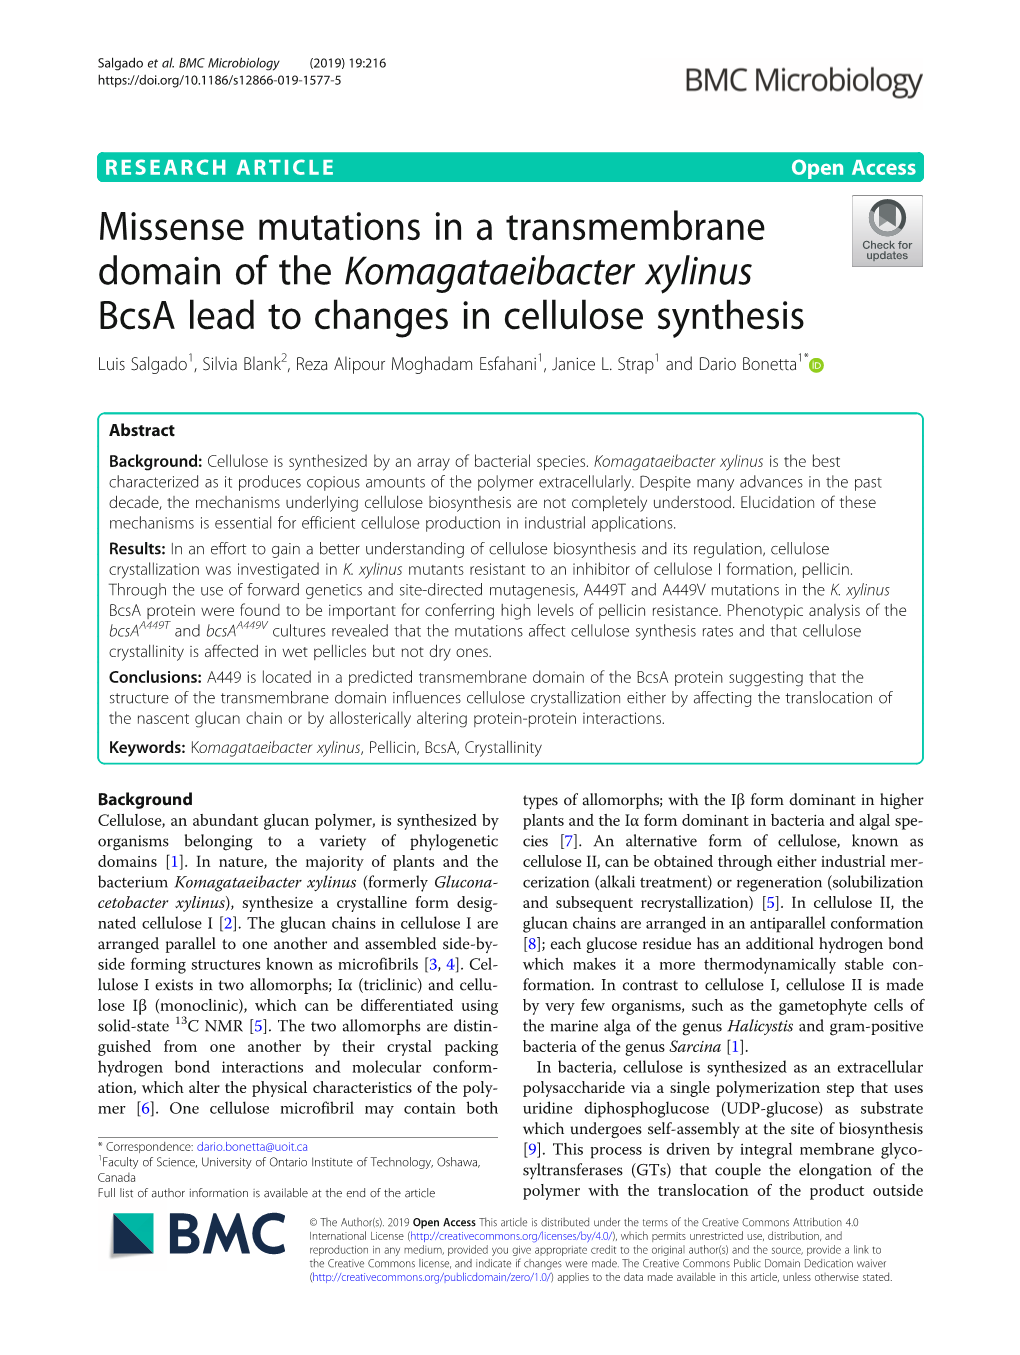 Missense Mutations in a Transmembrane Domain of The